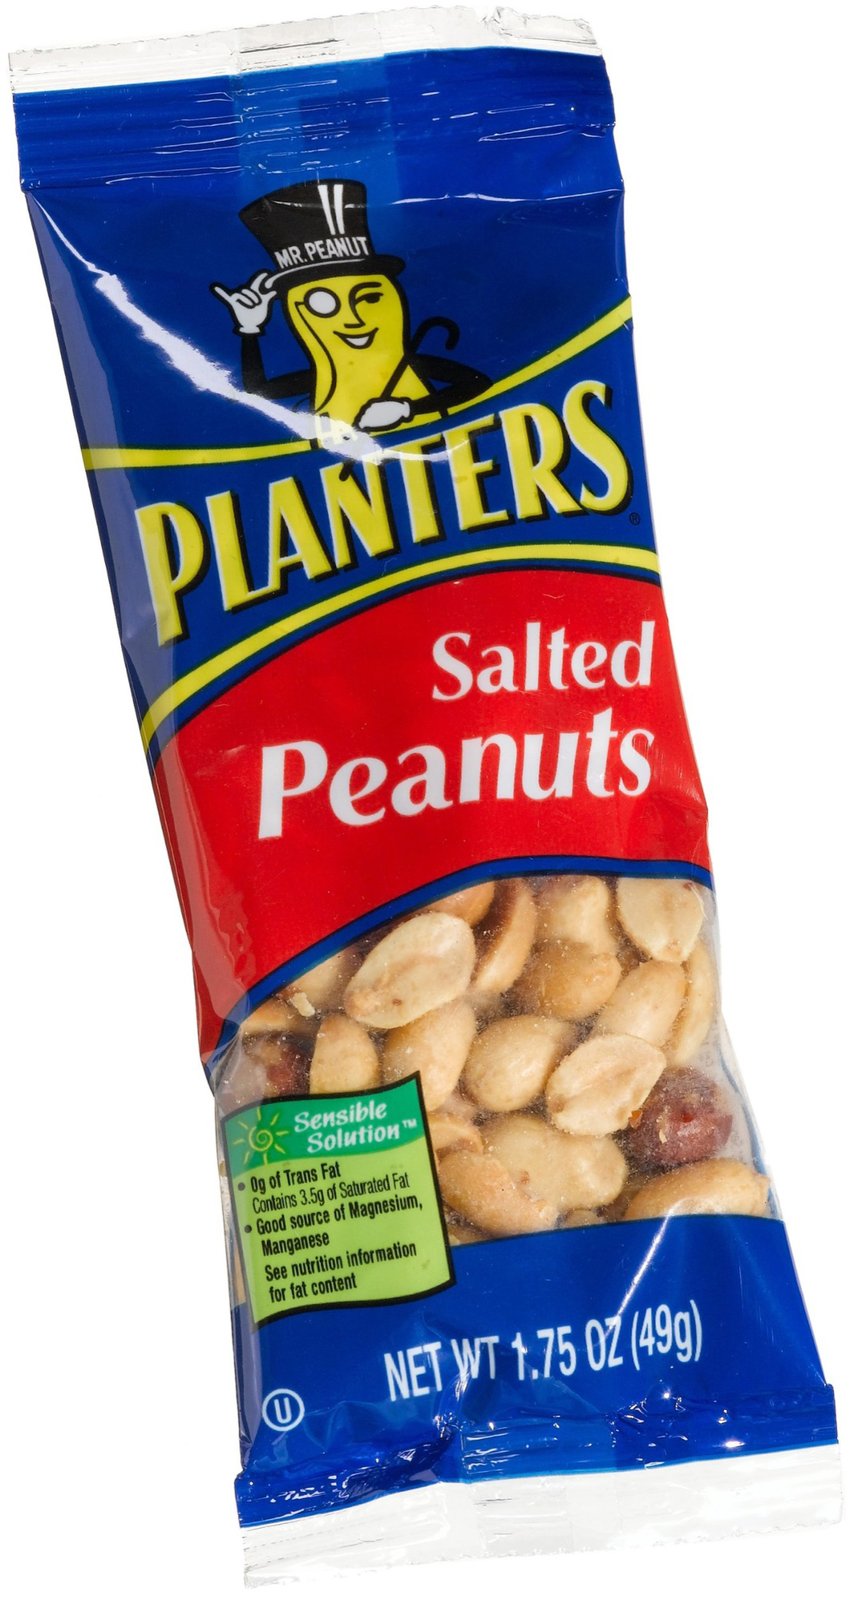 Planters Salted Nuts